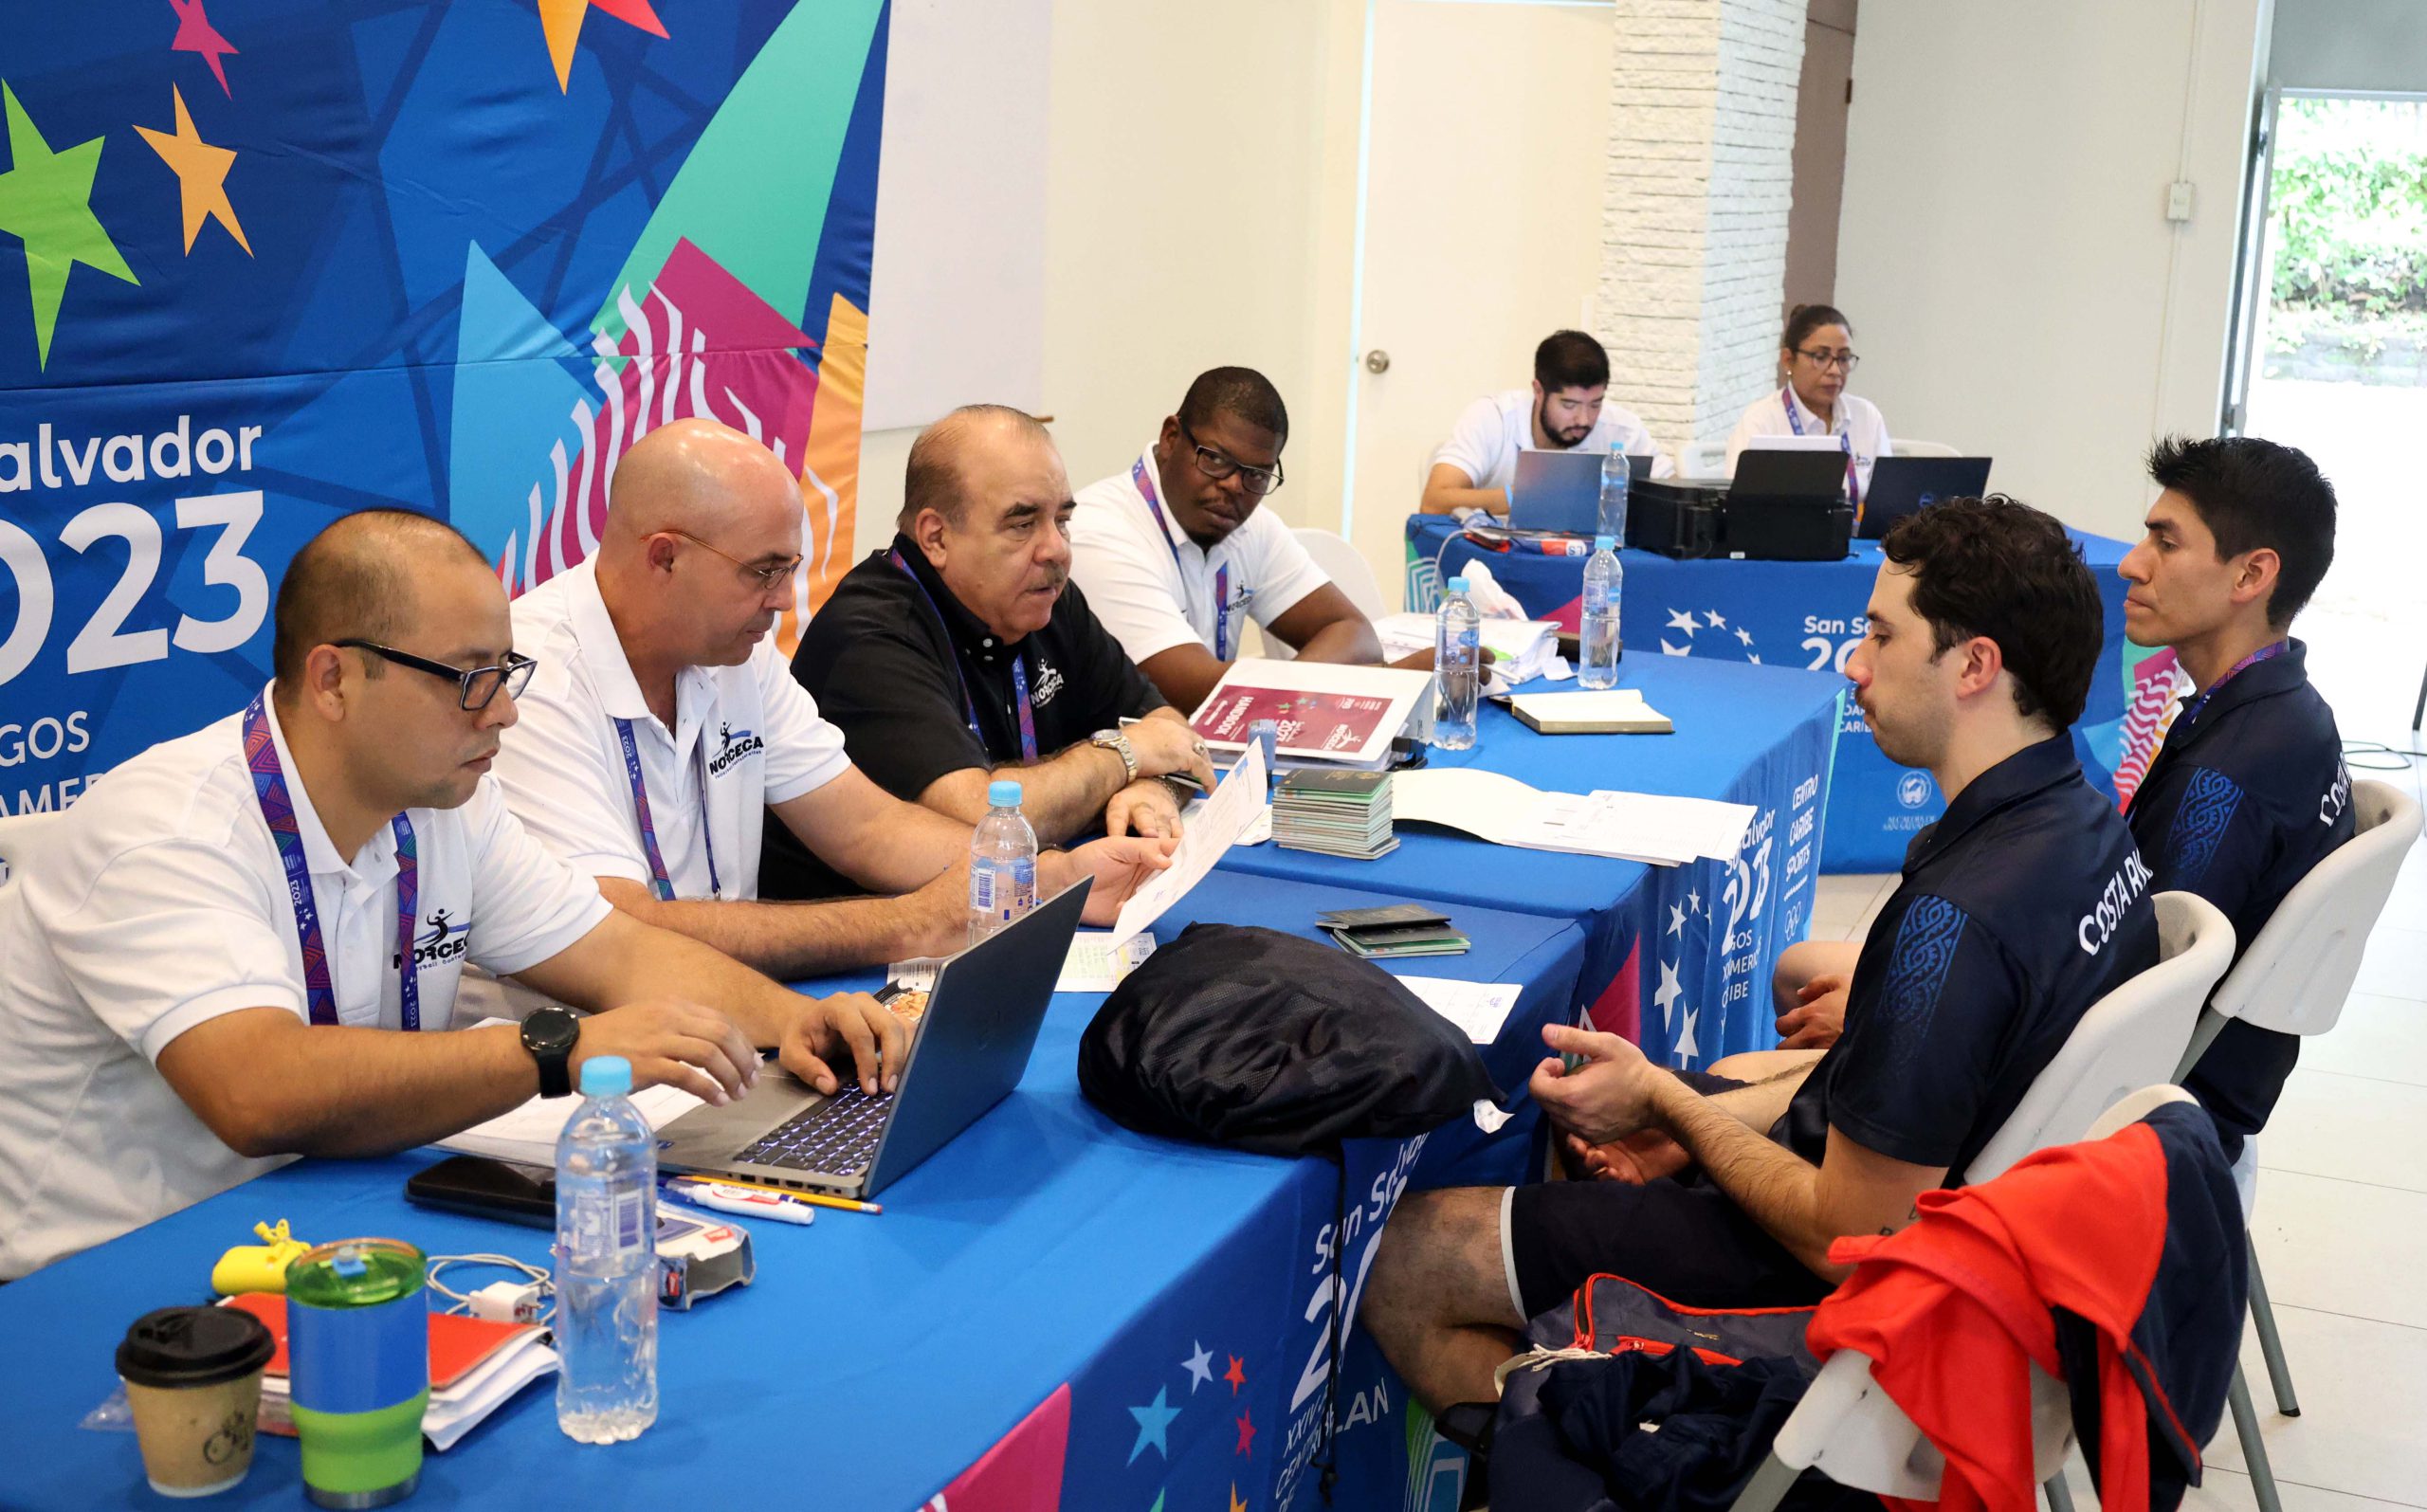 Head Coaches speak ahead of Women’s Volleyball at the 2023 CAC Games